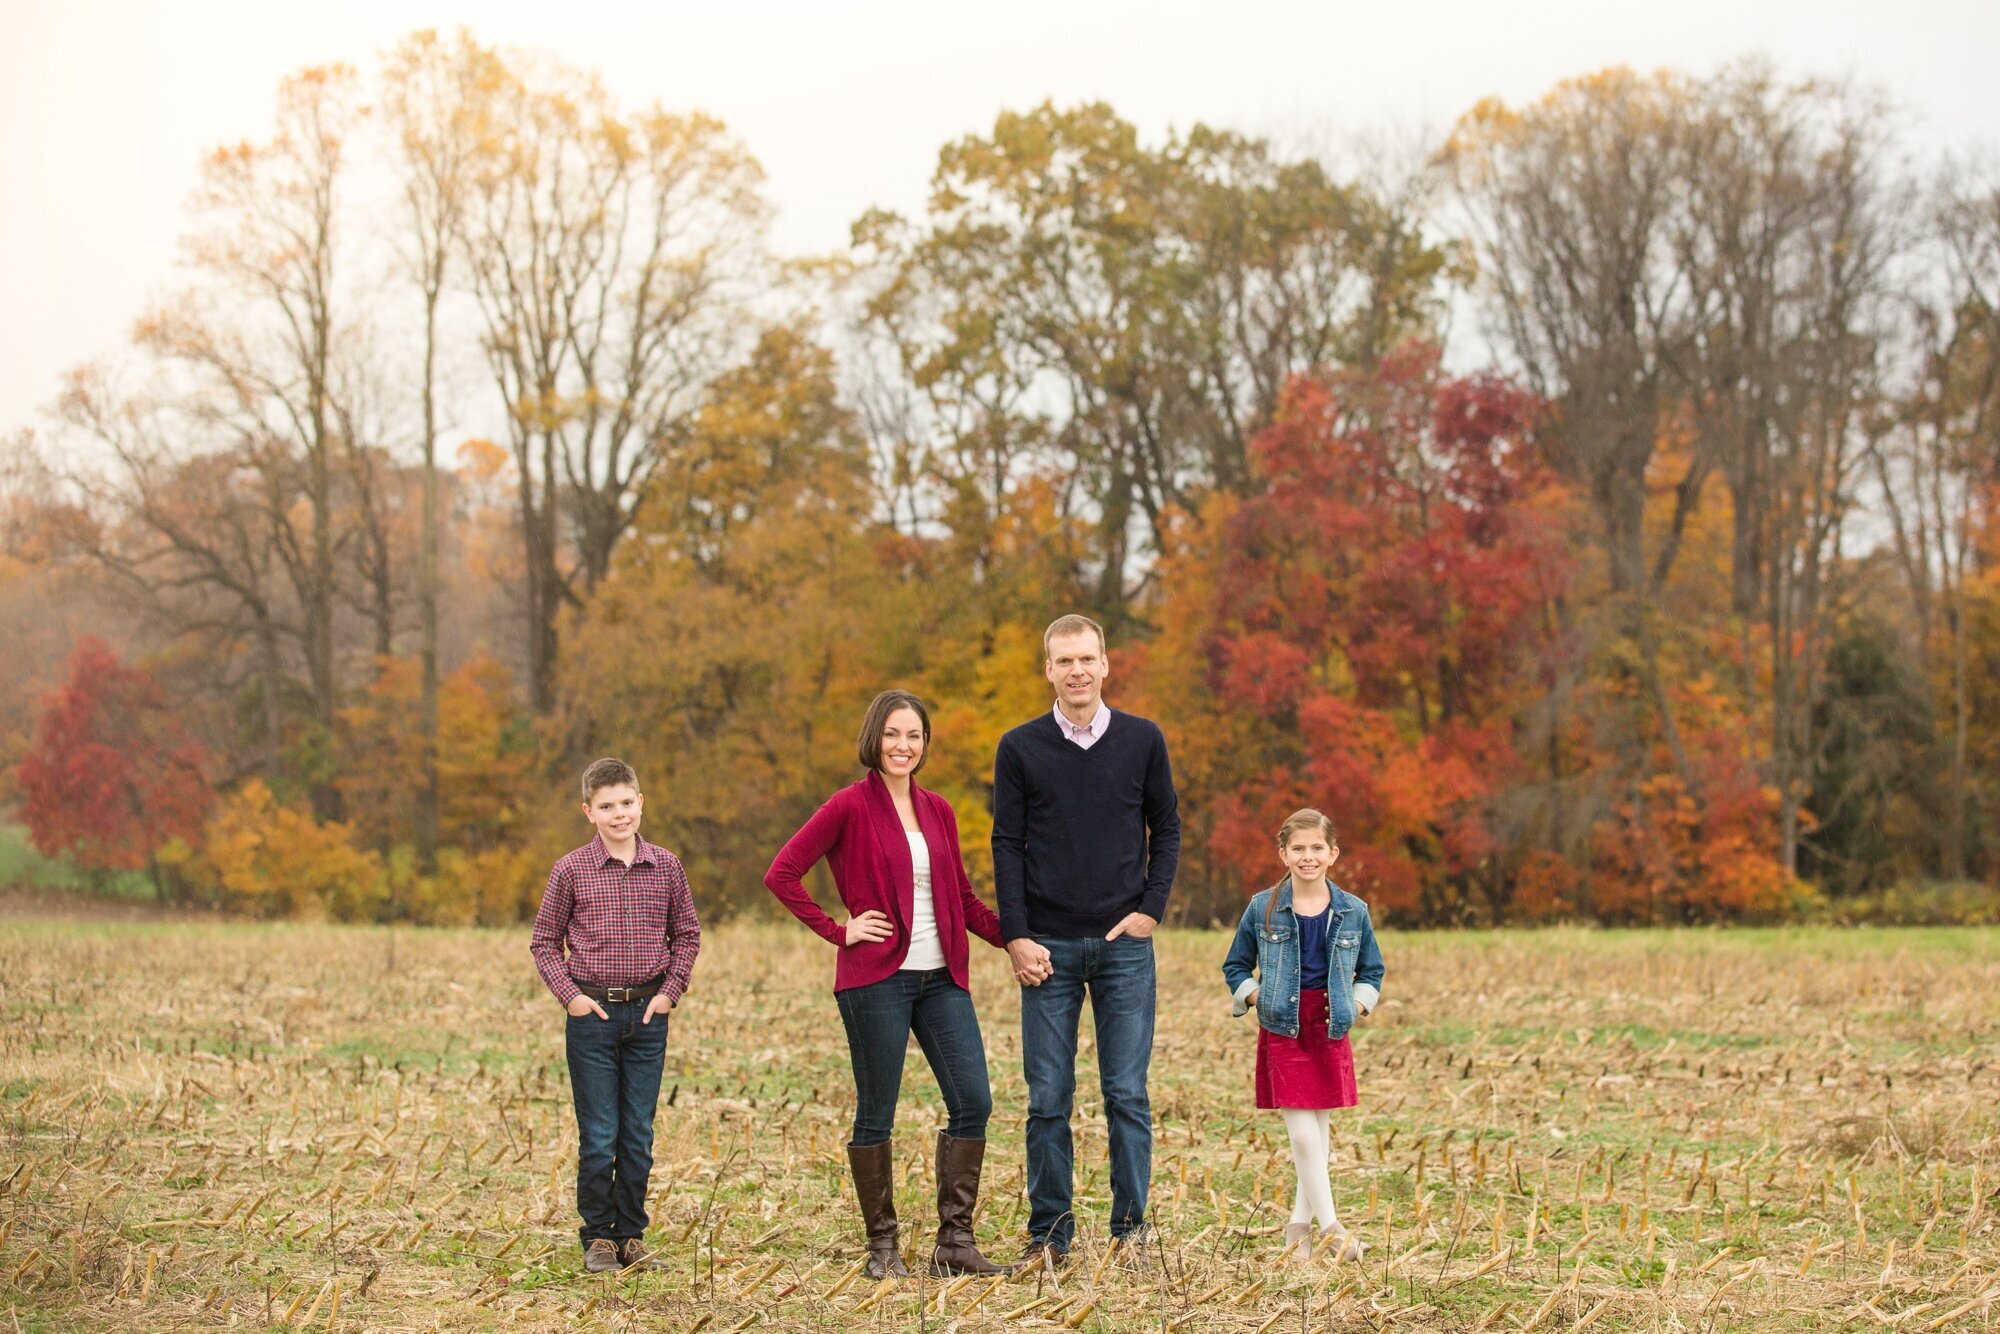 location ideas for photo sessions near cranberry township and zelienople, cranberry township photographer, zelienople photographer, north pittsburgh photographer, mcconnells mill photos